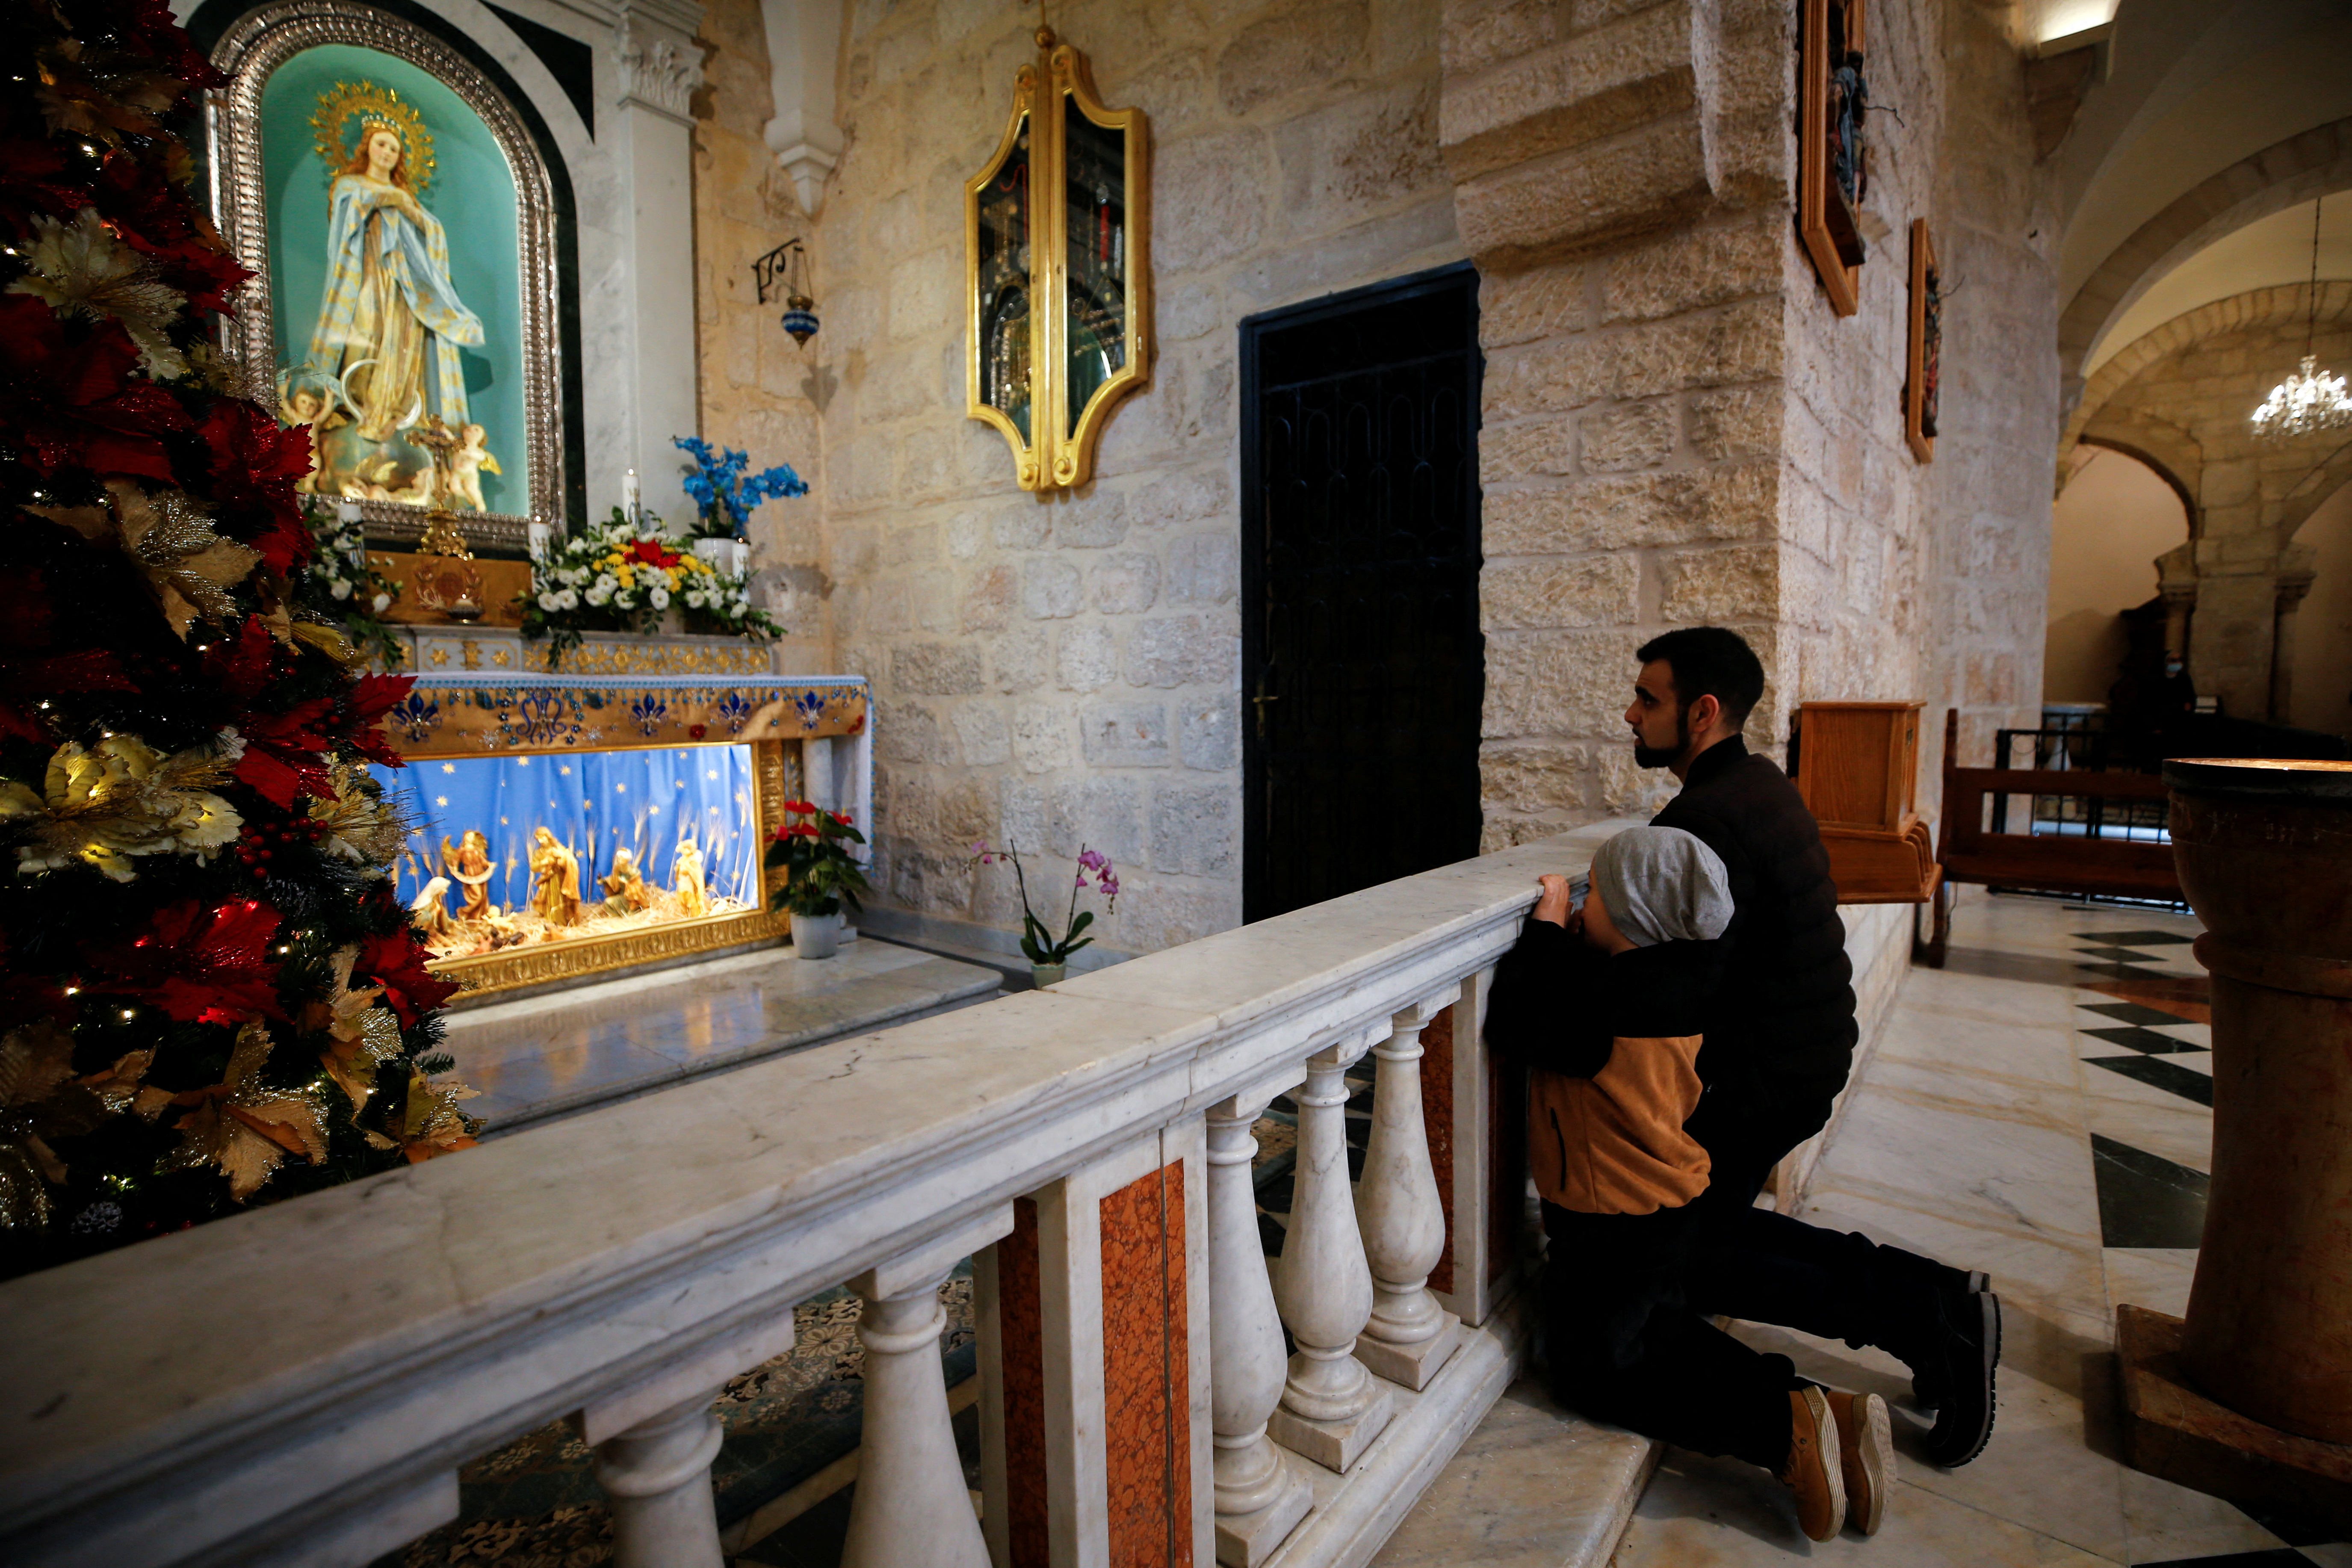 Worshipers pray ahead of Christmas morning mass at Saint Catherine's Church, in the Church of the Nativity, in Bethlehem in the Israeli-occupied West Bank, December 25, 2021. REUTERS/Mussa Qawasma